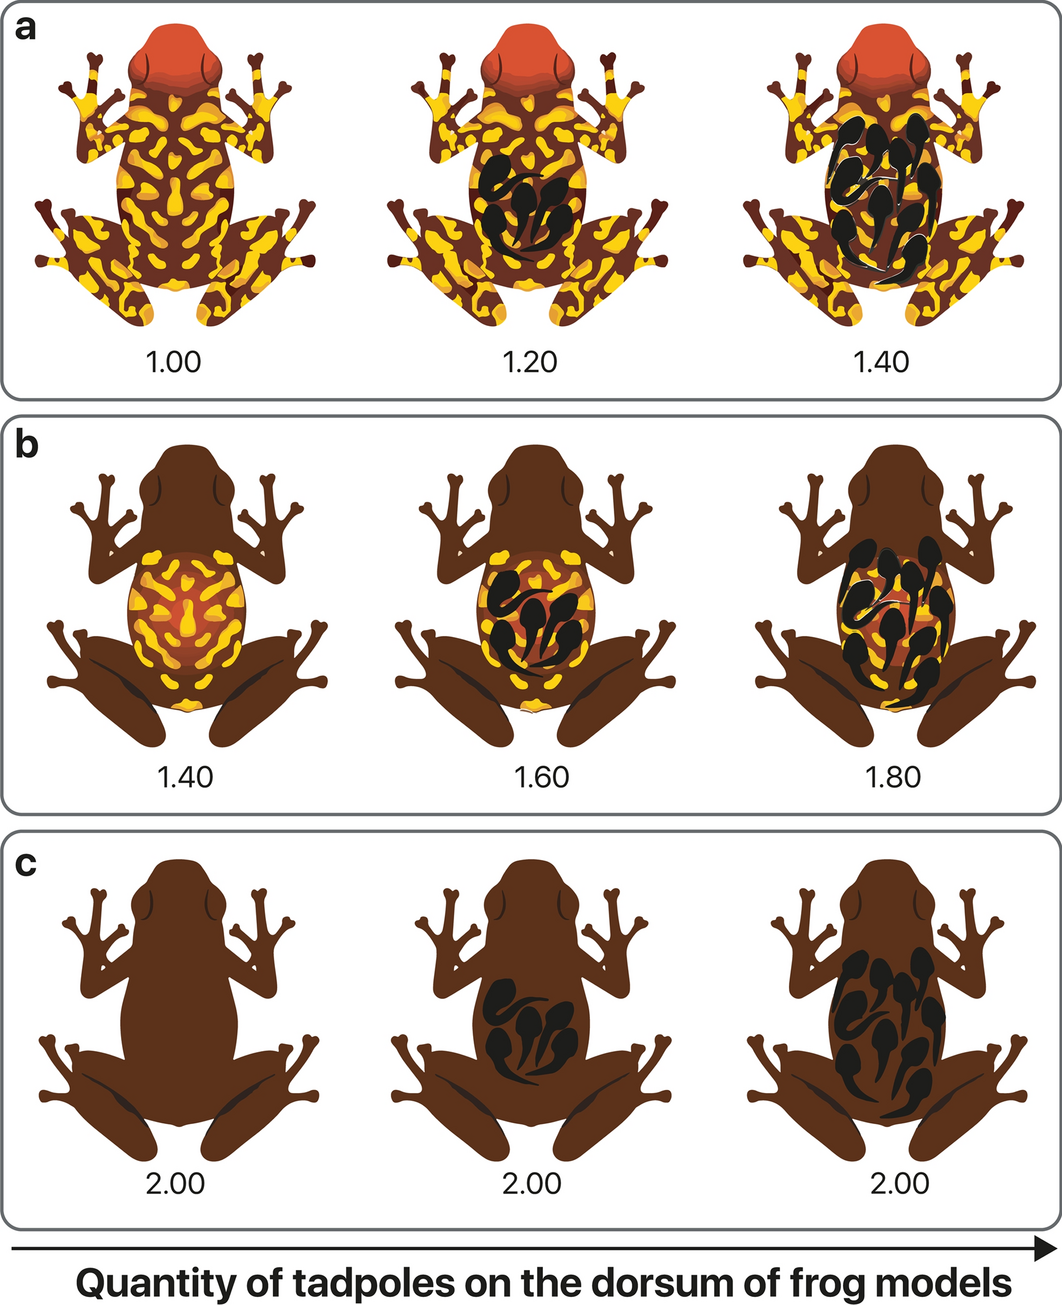 Experimental evidence in a poison frog model suggests that tadpole